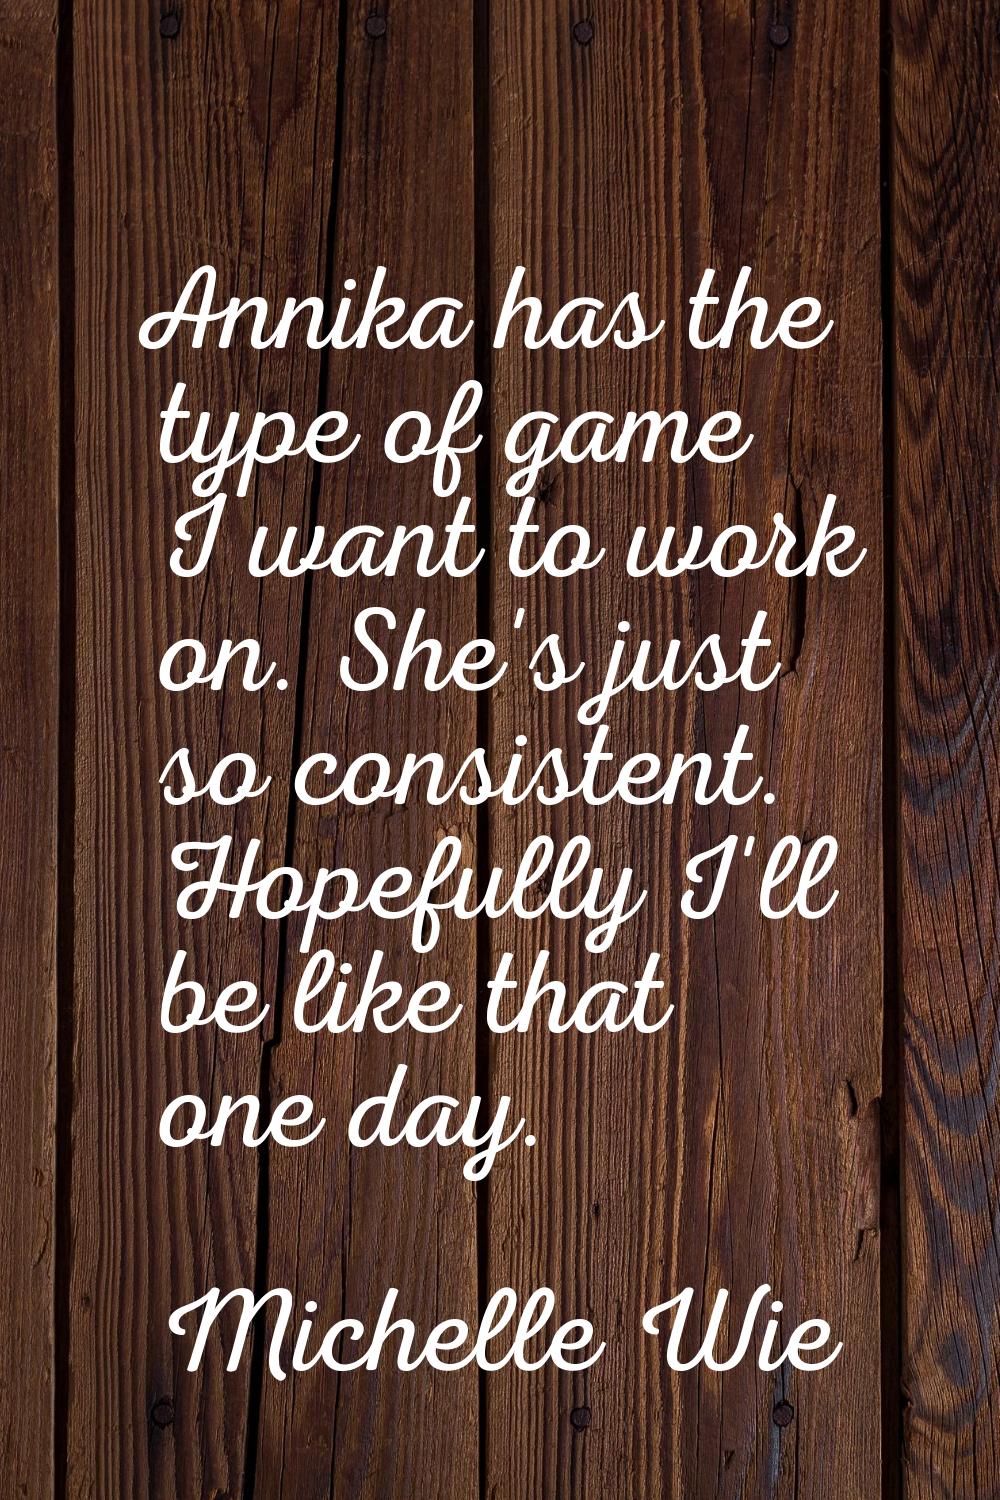 Annika has the type of game I want to work on. She's just so consistent. Hopefully I'll be like tha